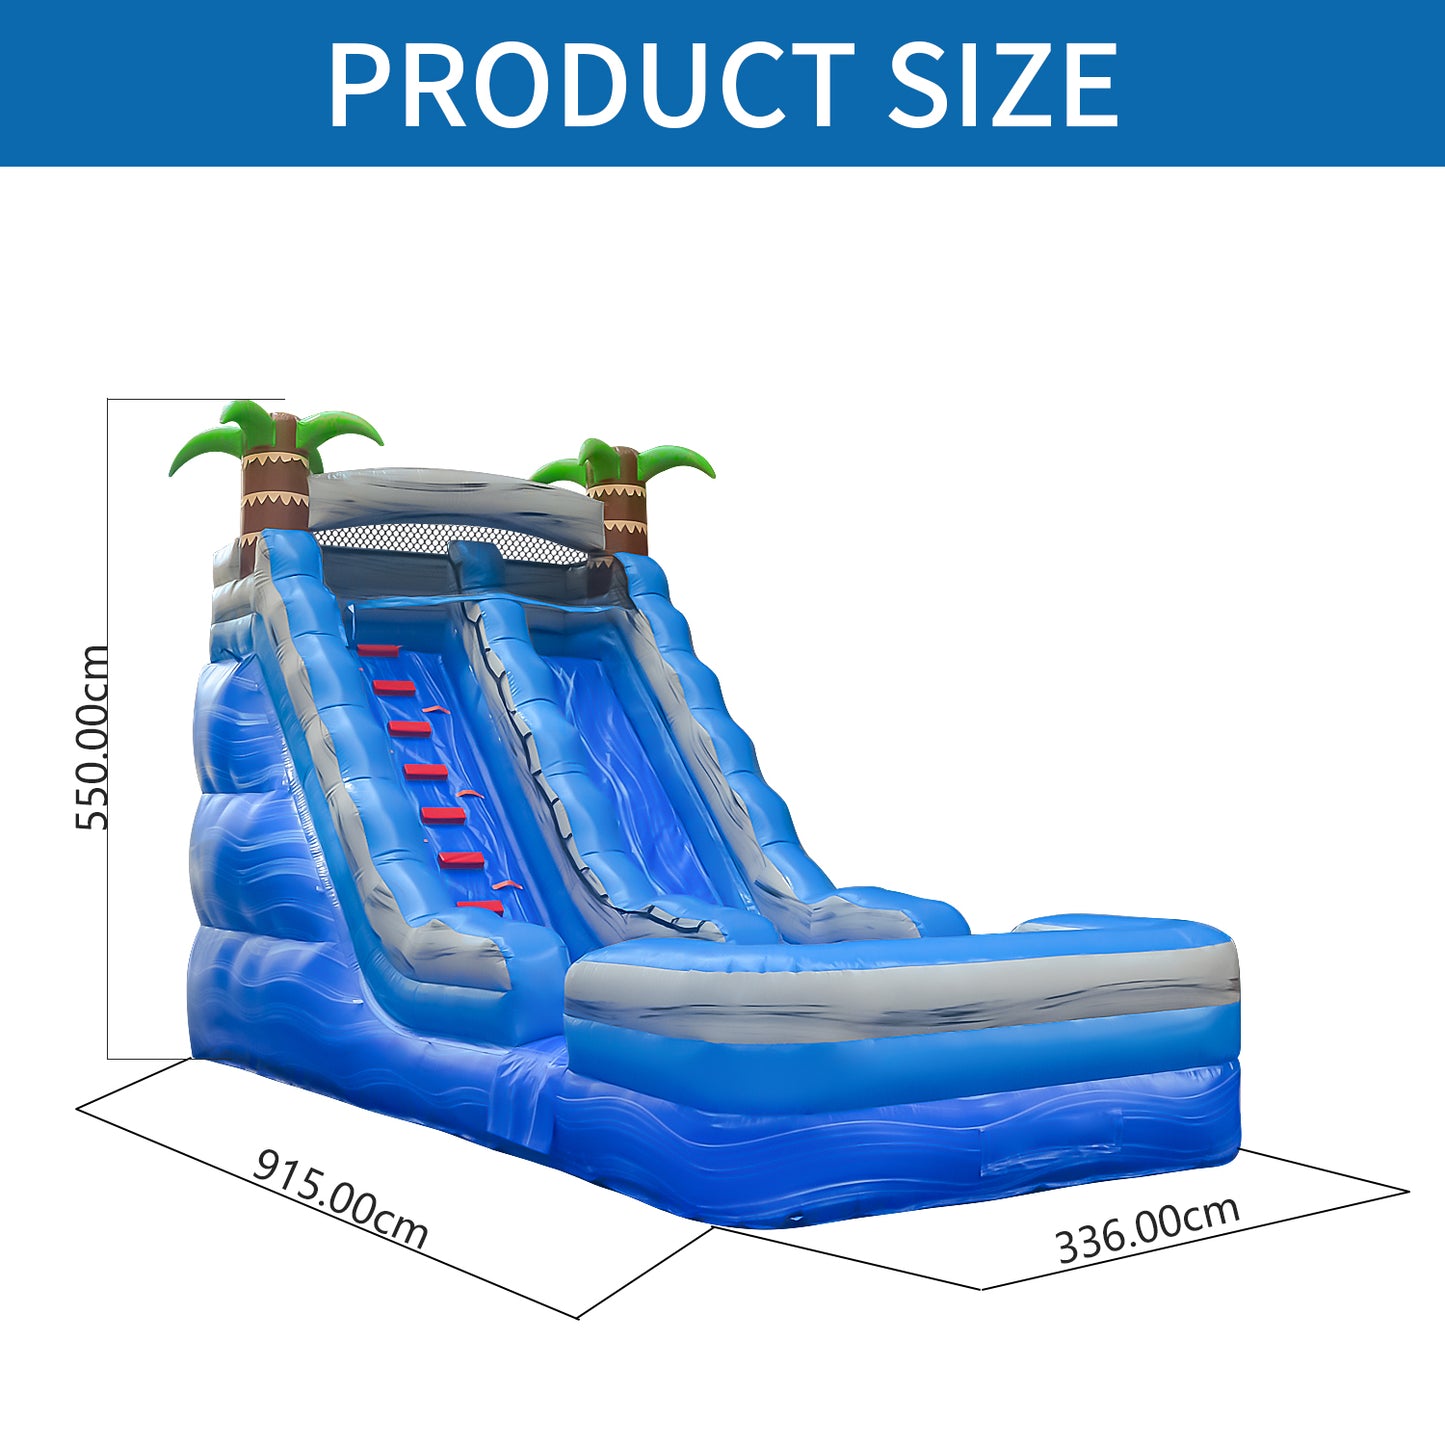 COMING Wet/Dry Tropical Waterfall Commercial Inflatable Water Slide 30' x 11' x 18'H #11162